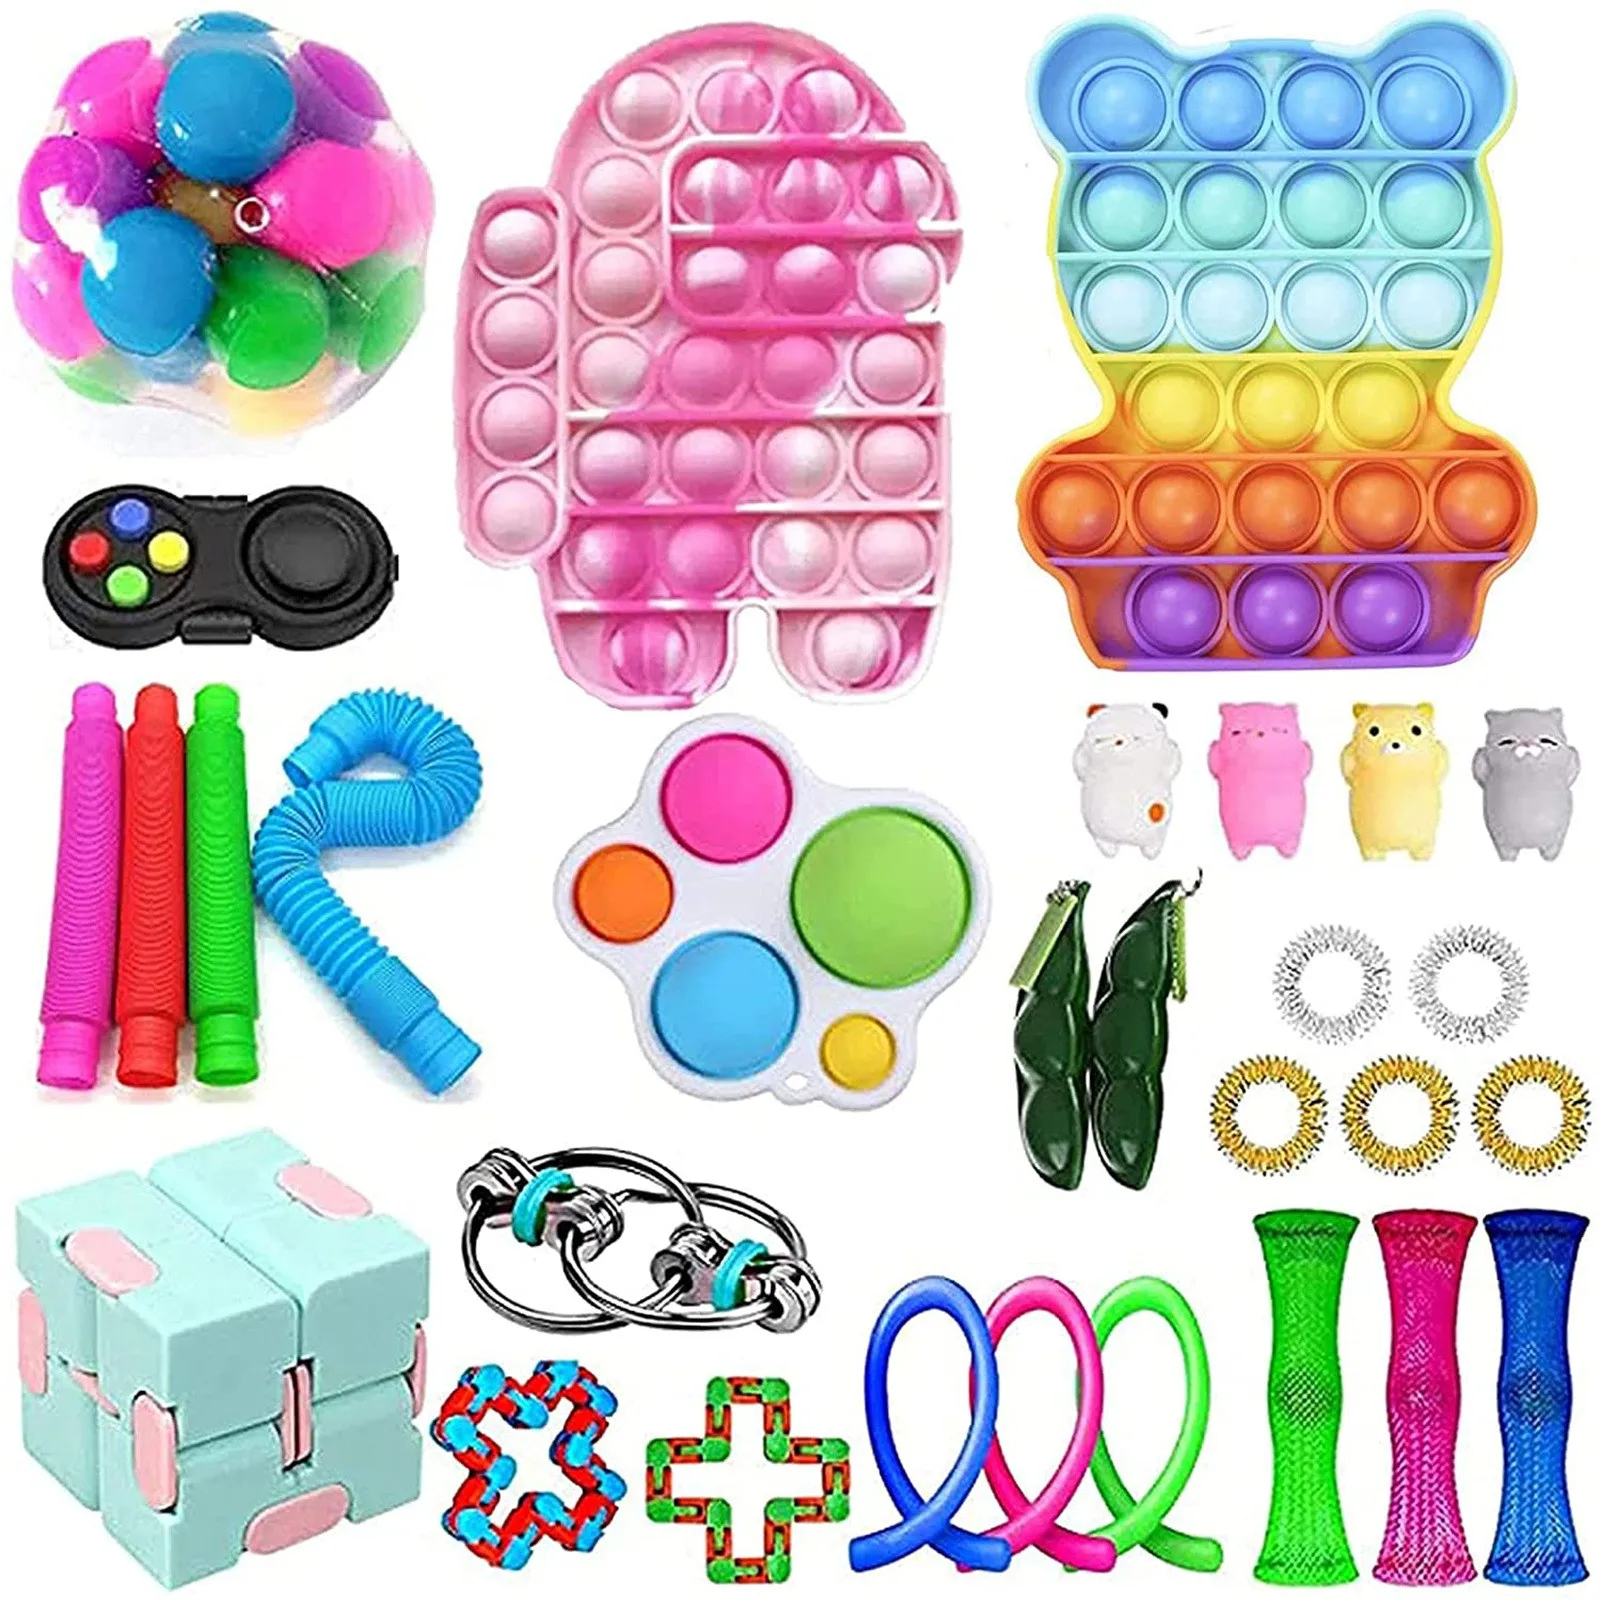 2021 30PC Cheap Fidget Toys Anti Stress Set Strings Relief Pack Gift for Adults Children Figet Sensory Squishy Relief Antistress